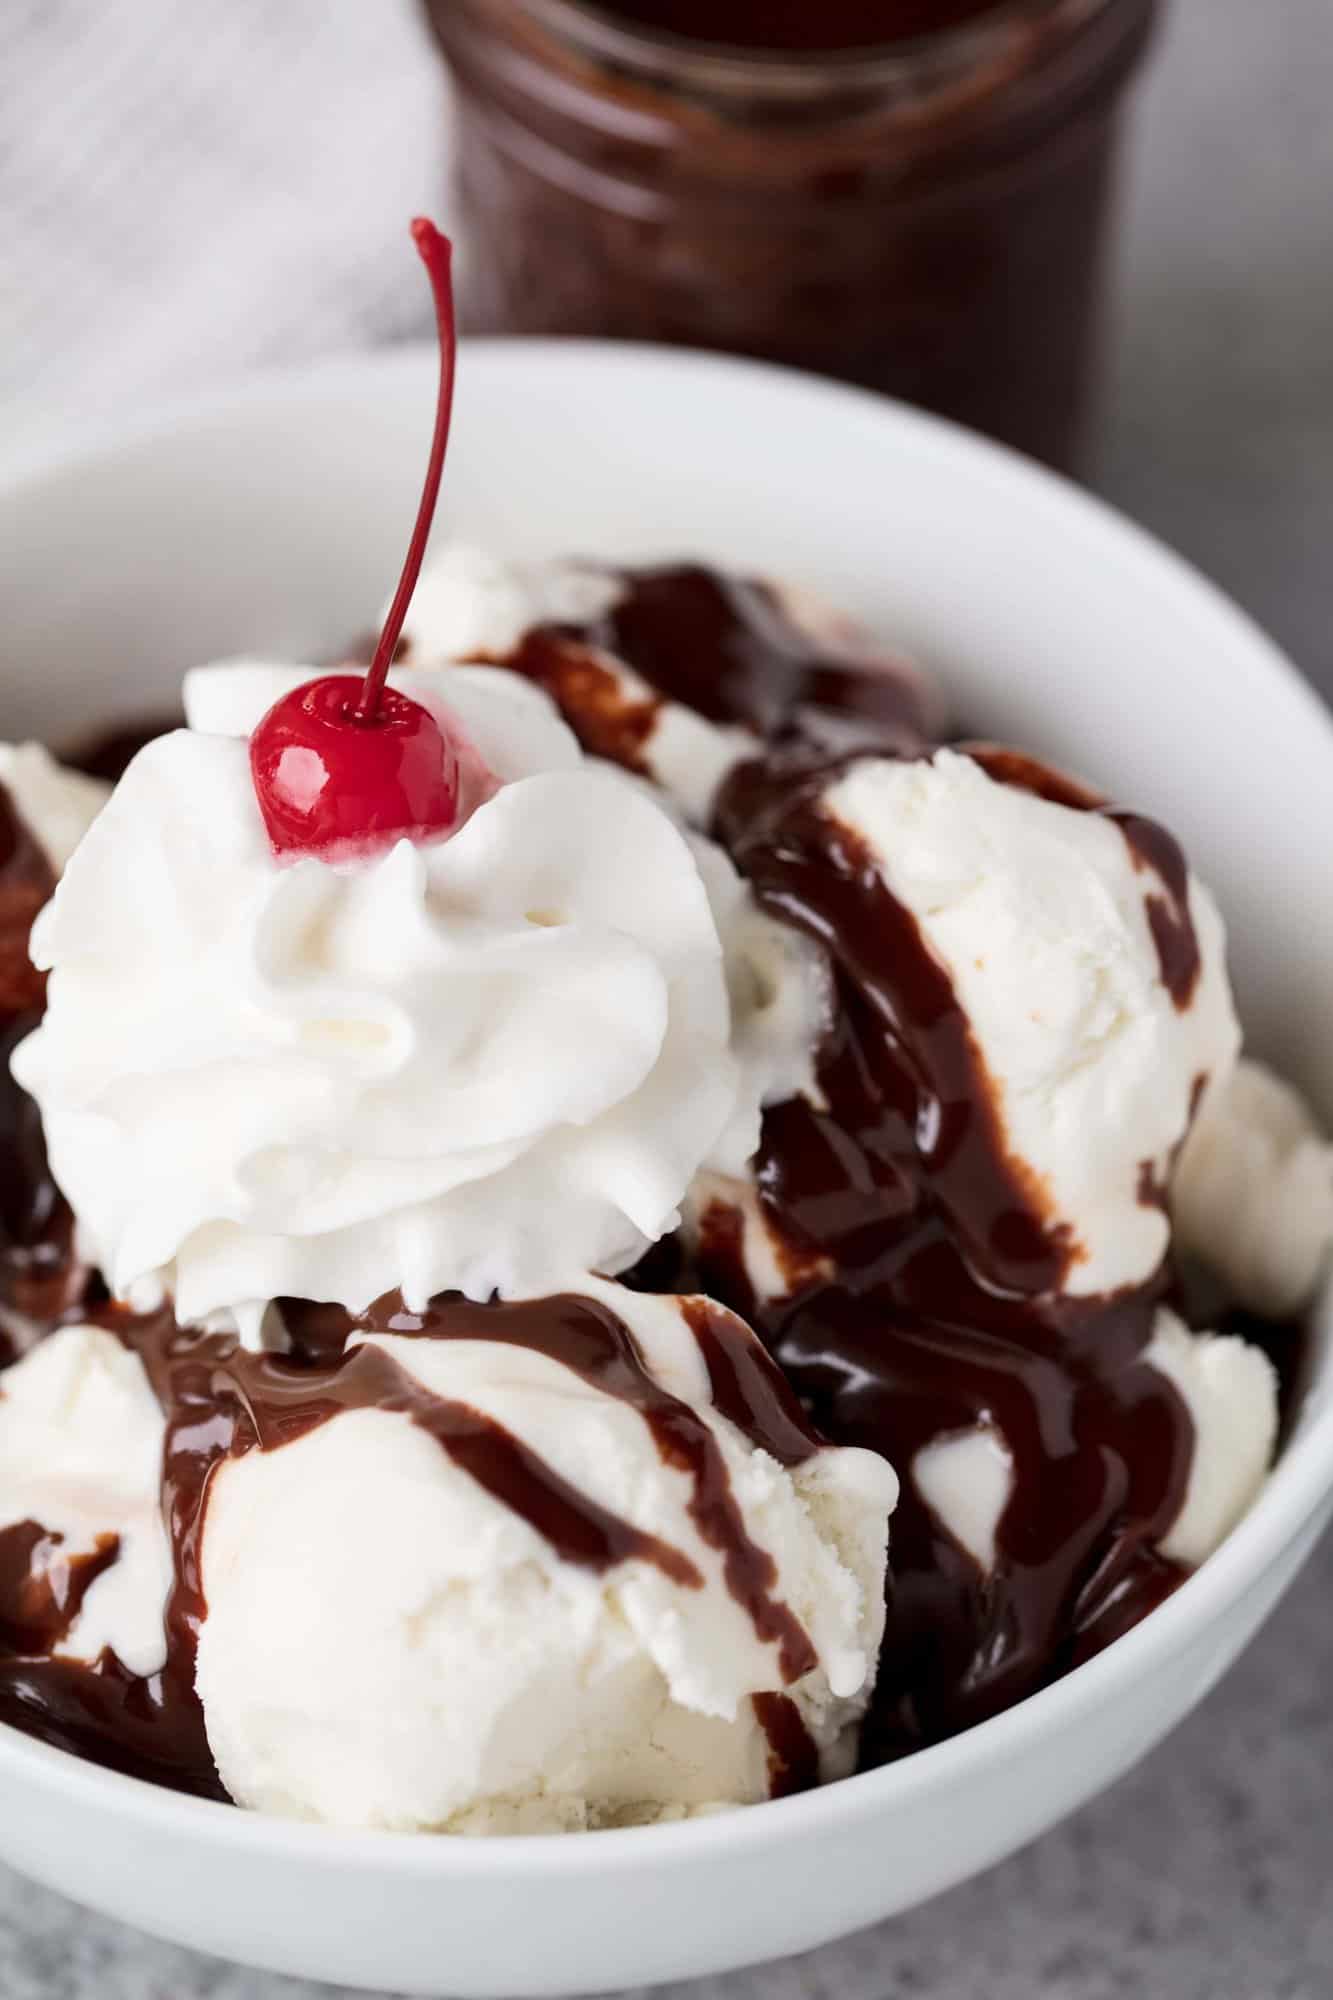 Thick, fudgy, gooey and smooth....this really is The Best Hot Fudge Sauce. It's super easy to make your own homemade hot fudge sauce at home and it tastes so much better than the store bought stuff.